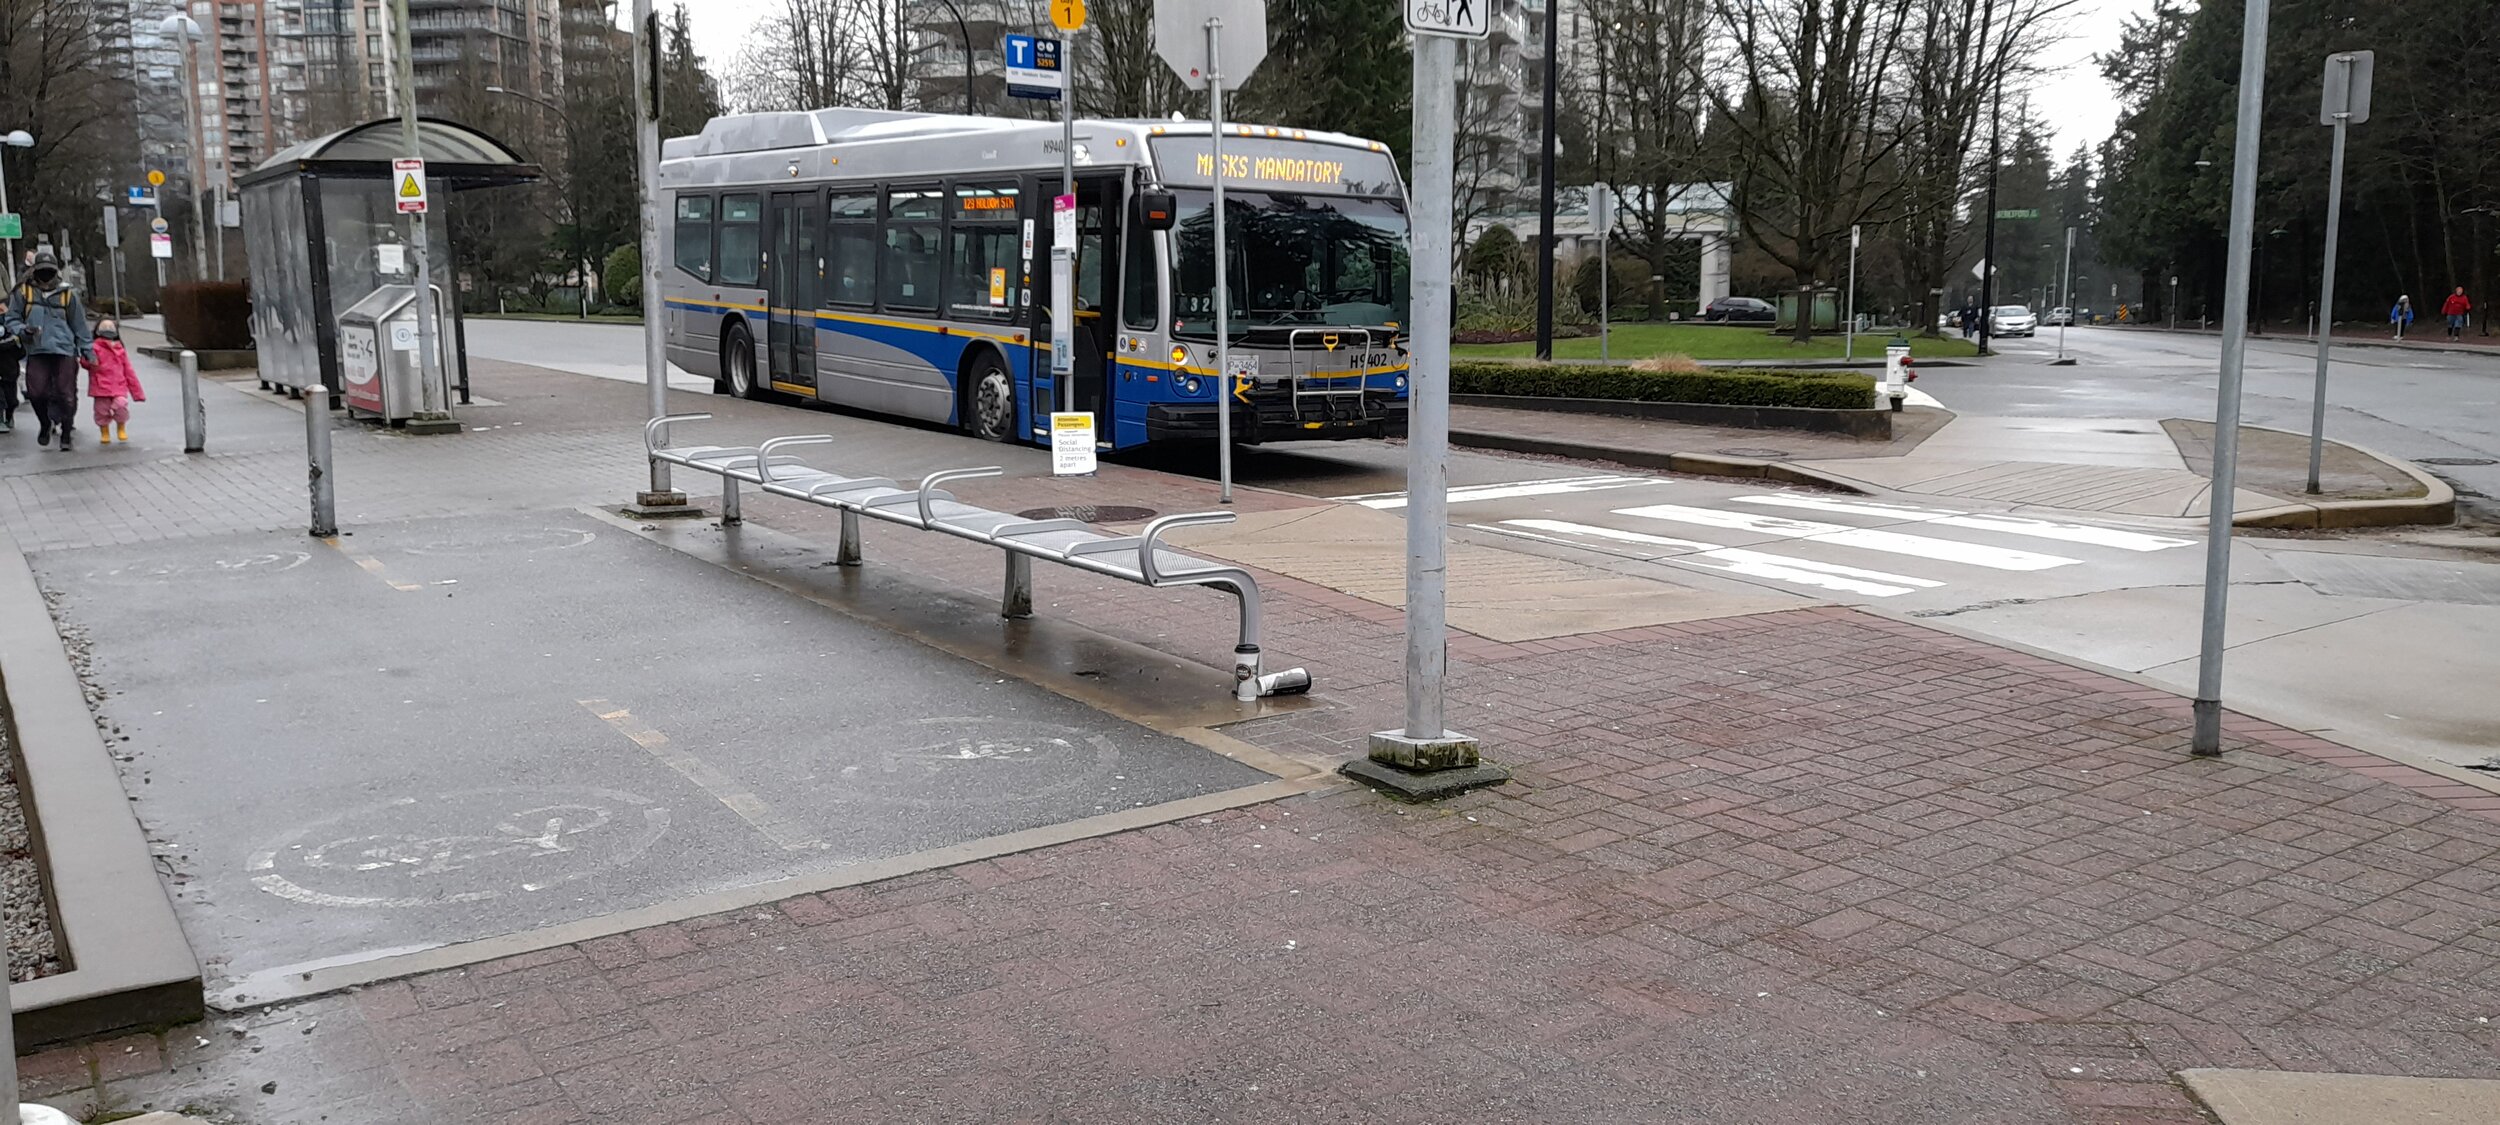 Bike patch and bus stop